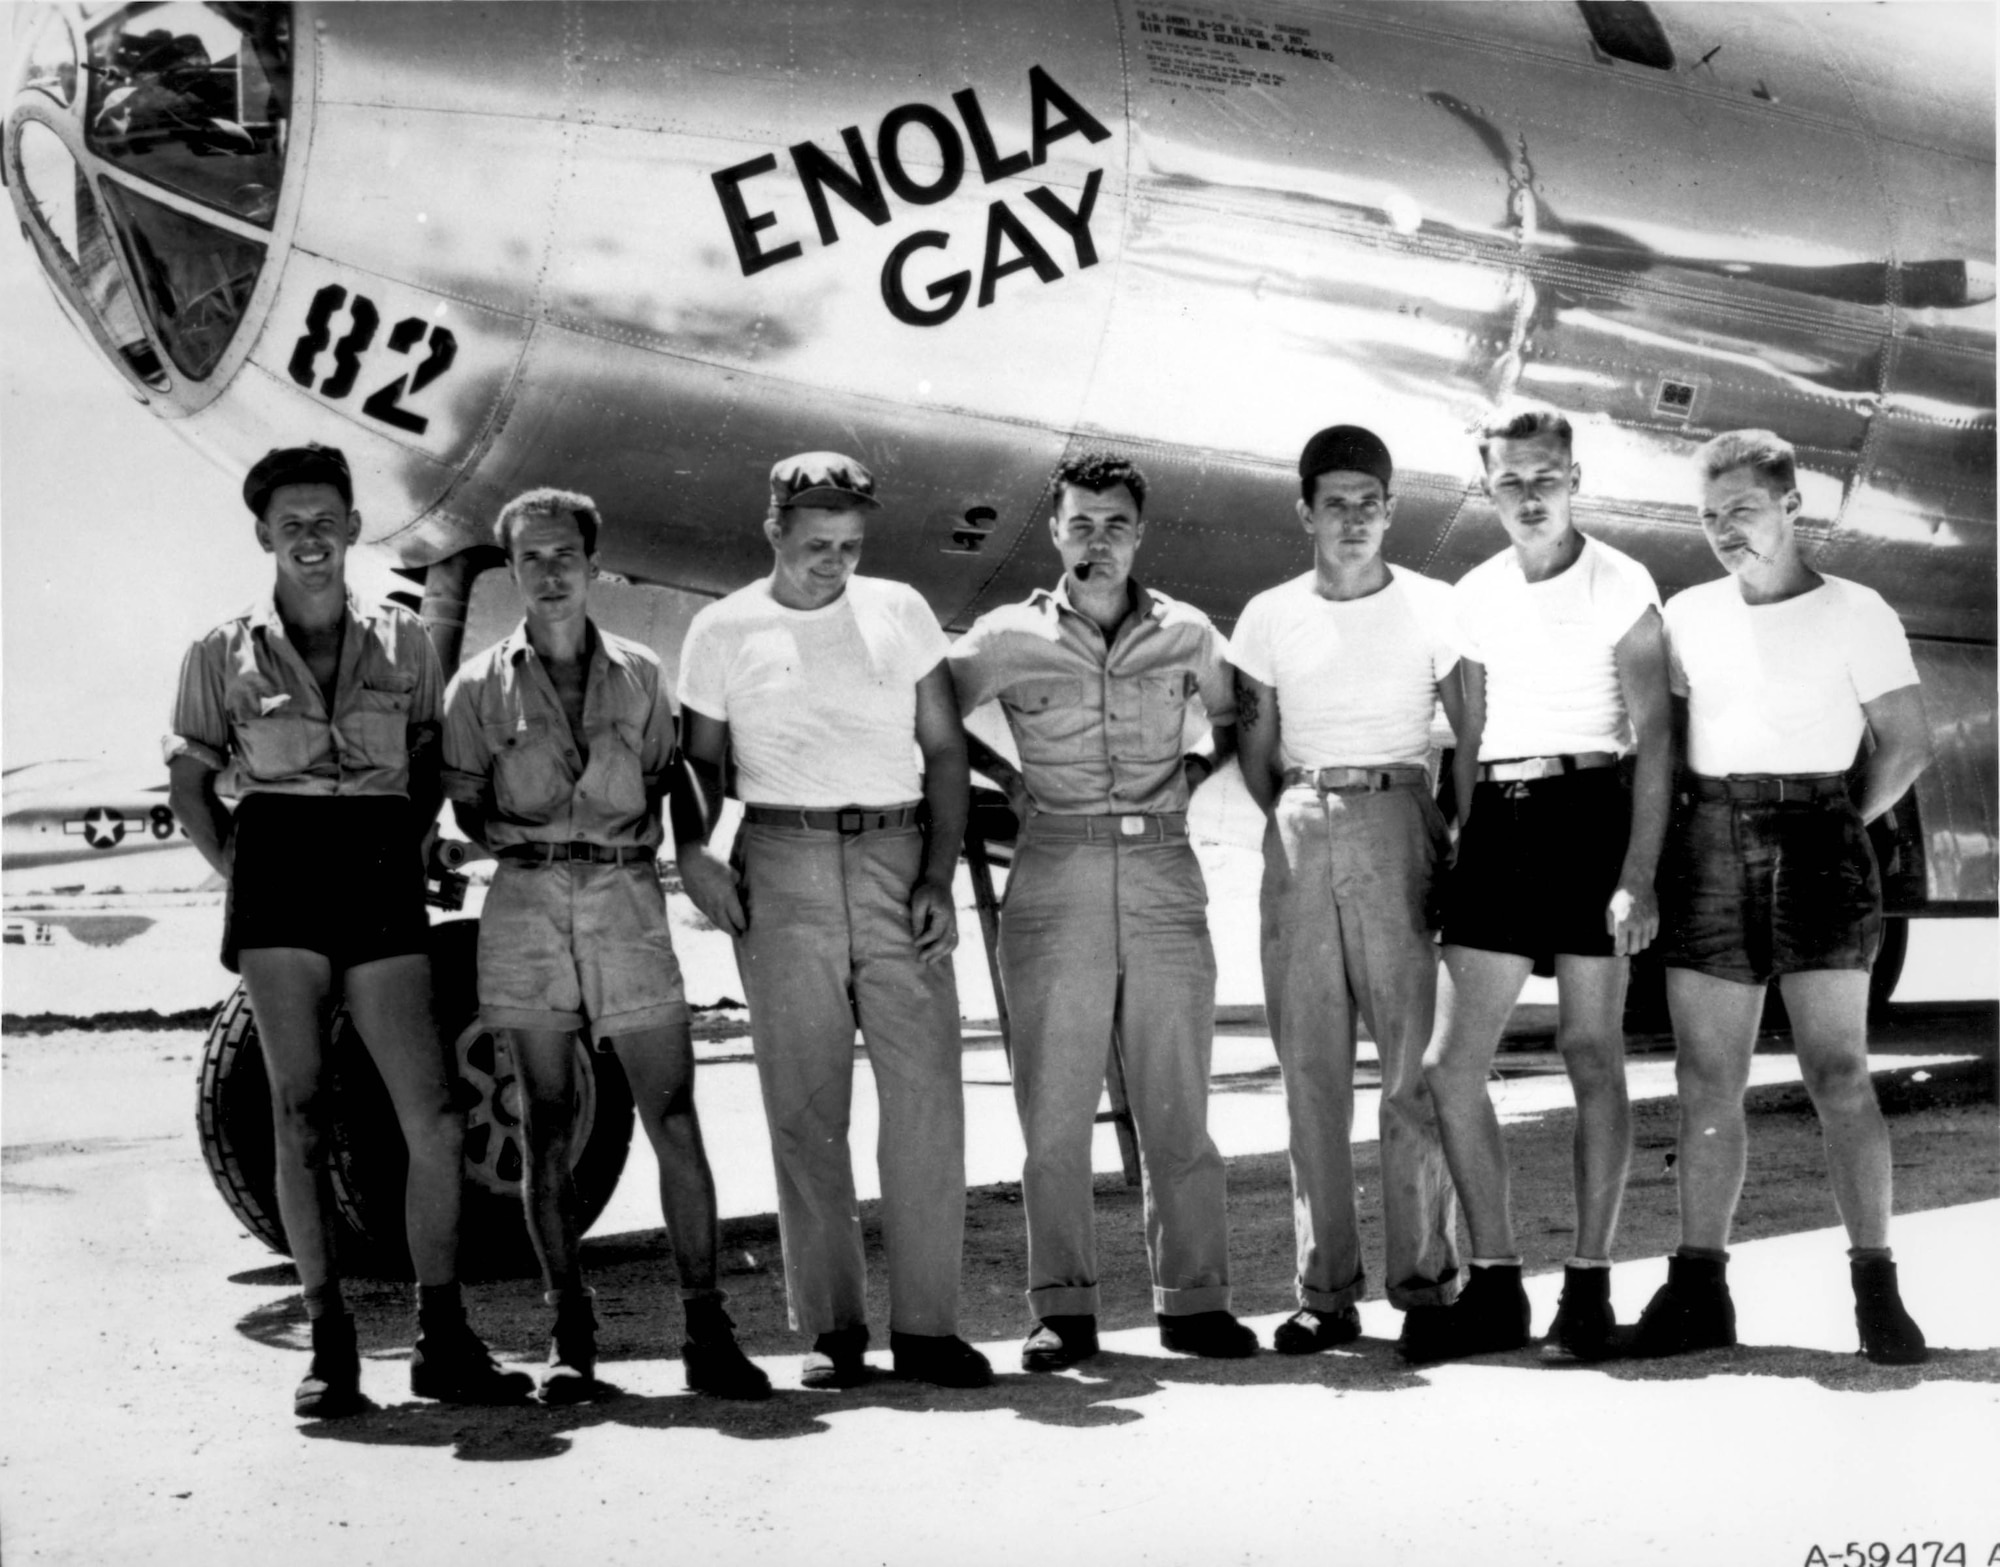 1940's -- The ground crew of the B-29 "Enola Gay" which atom-bombed Hiroshima, Japan.  Col. Paul W. Tibbets, the pilot is the center.  Marianas Islands. (U.S. Air Force photo)